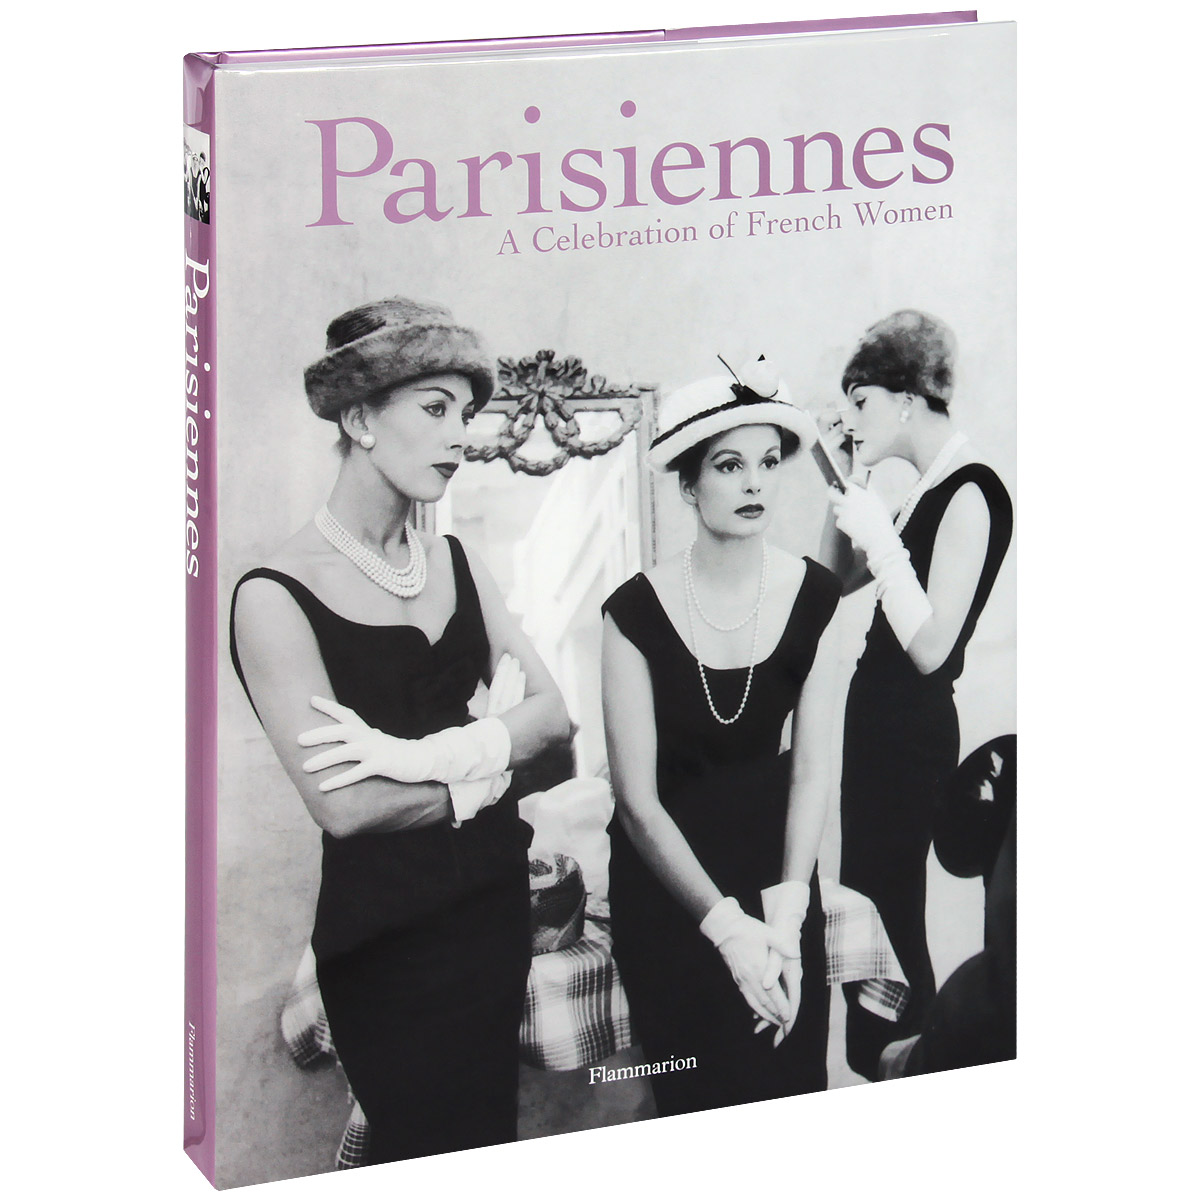 Parisiennes: A Celebration of French Women